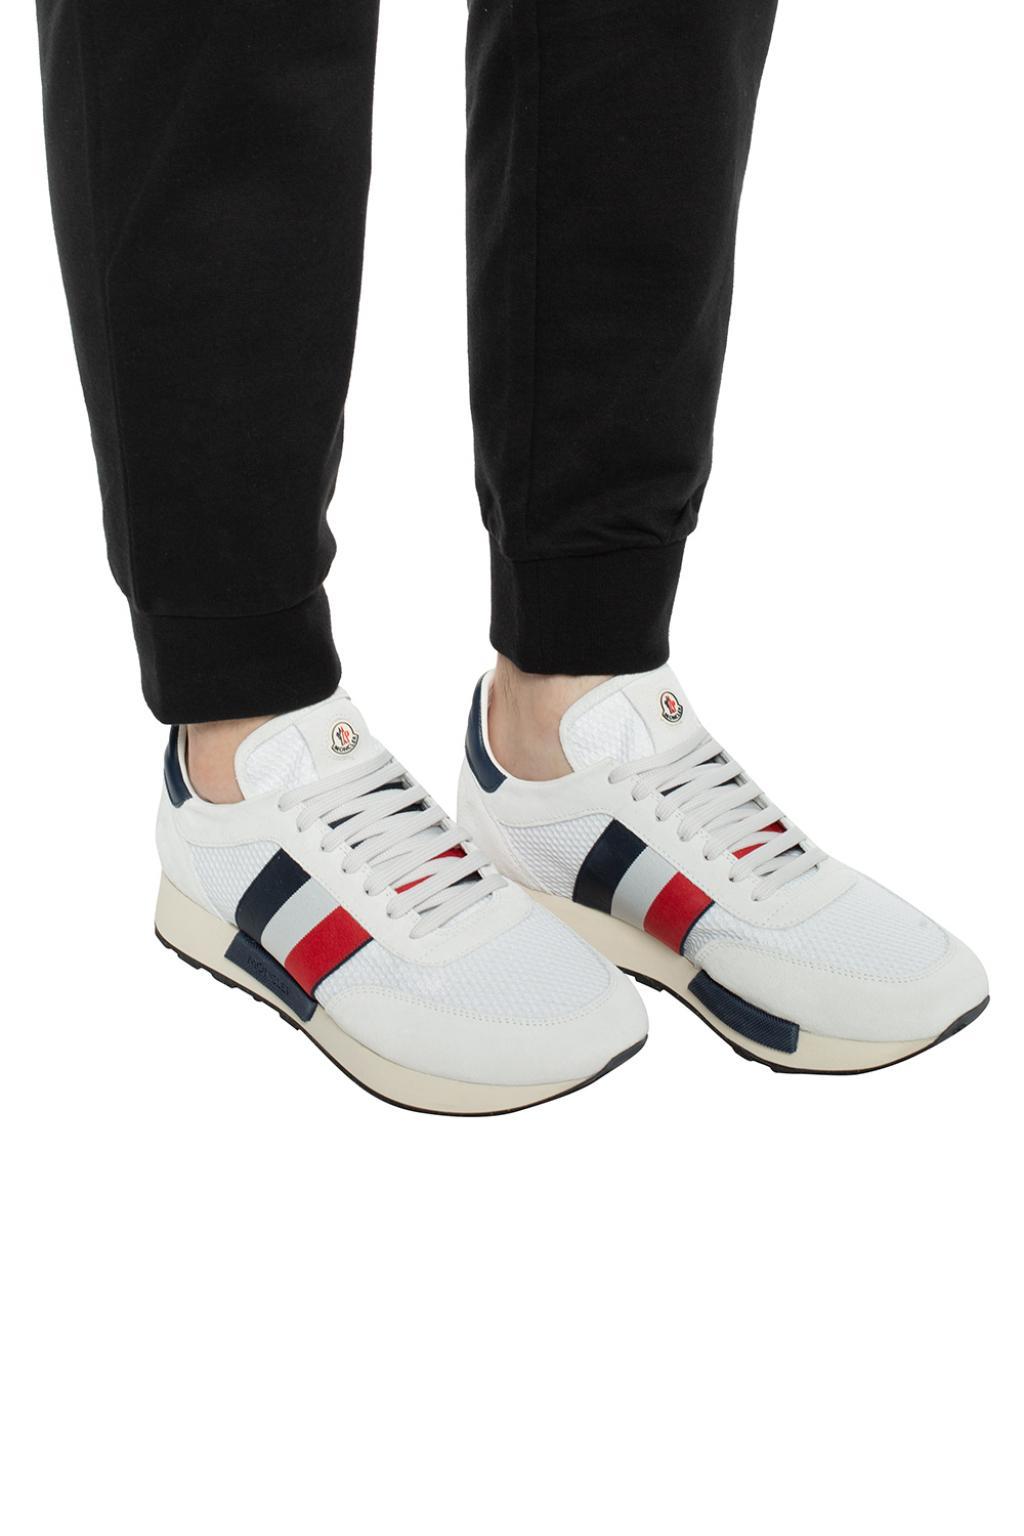 Moncler Suede Horace Sneakers for Men | Lyst